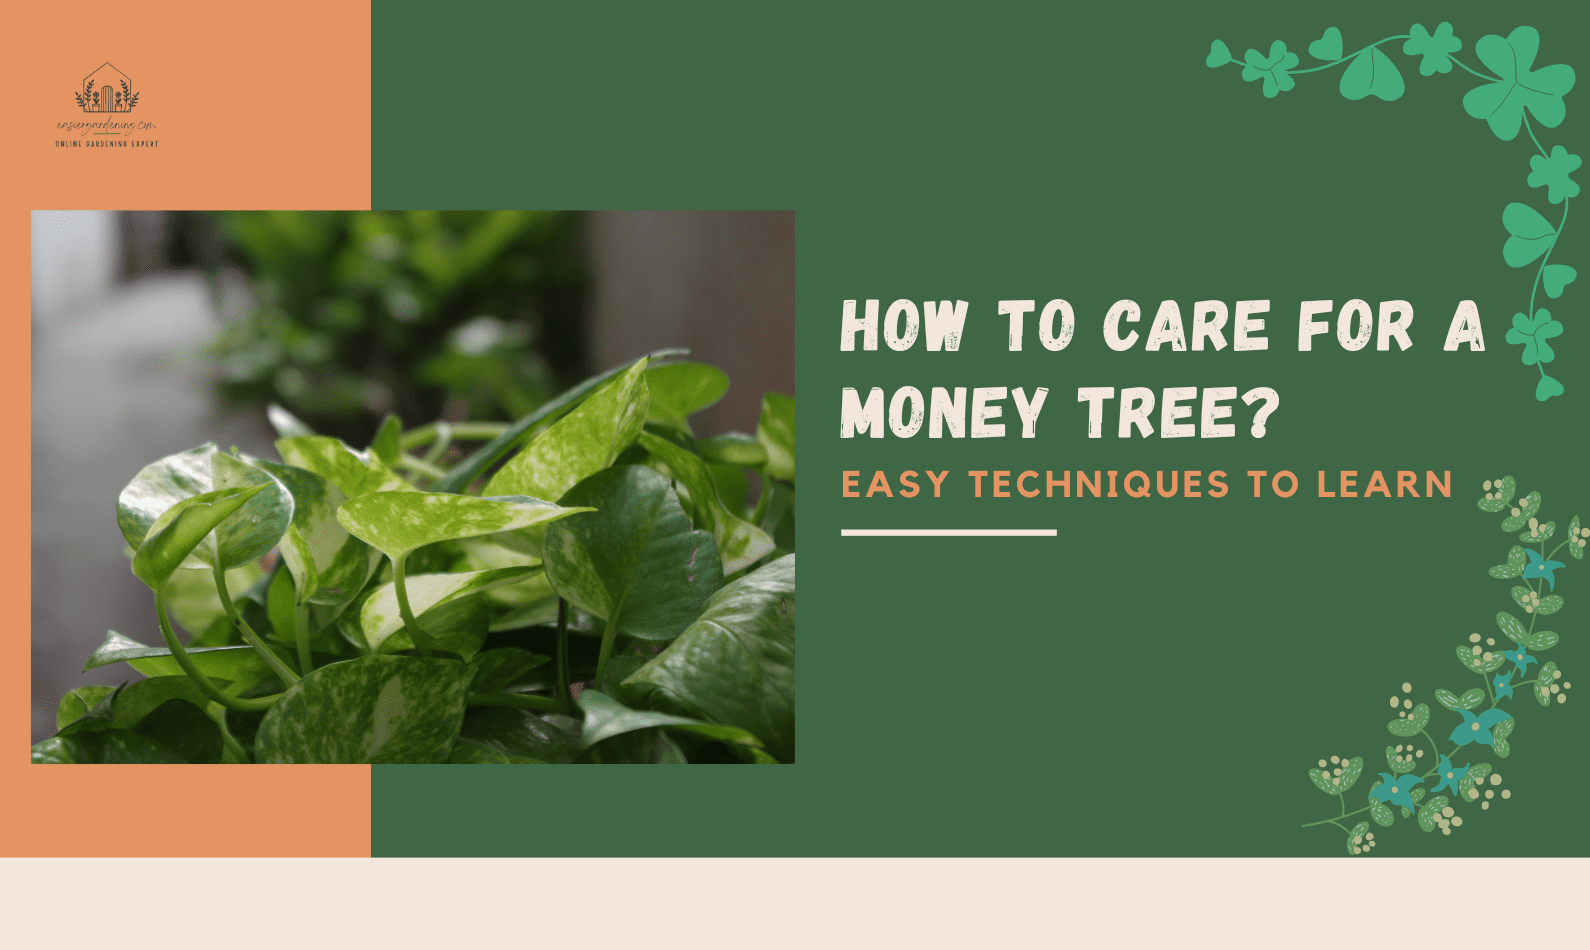 How to Care for a Money Tree? Easy Techniques to Learn